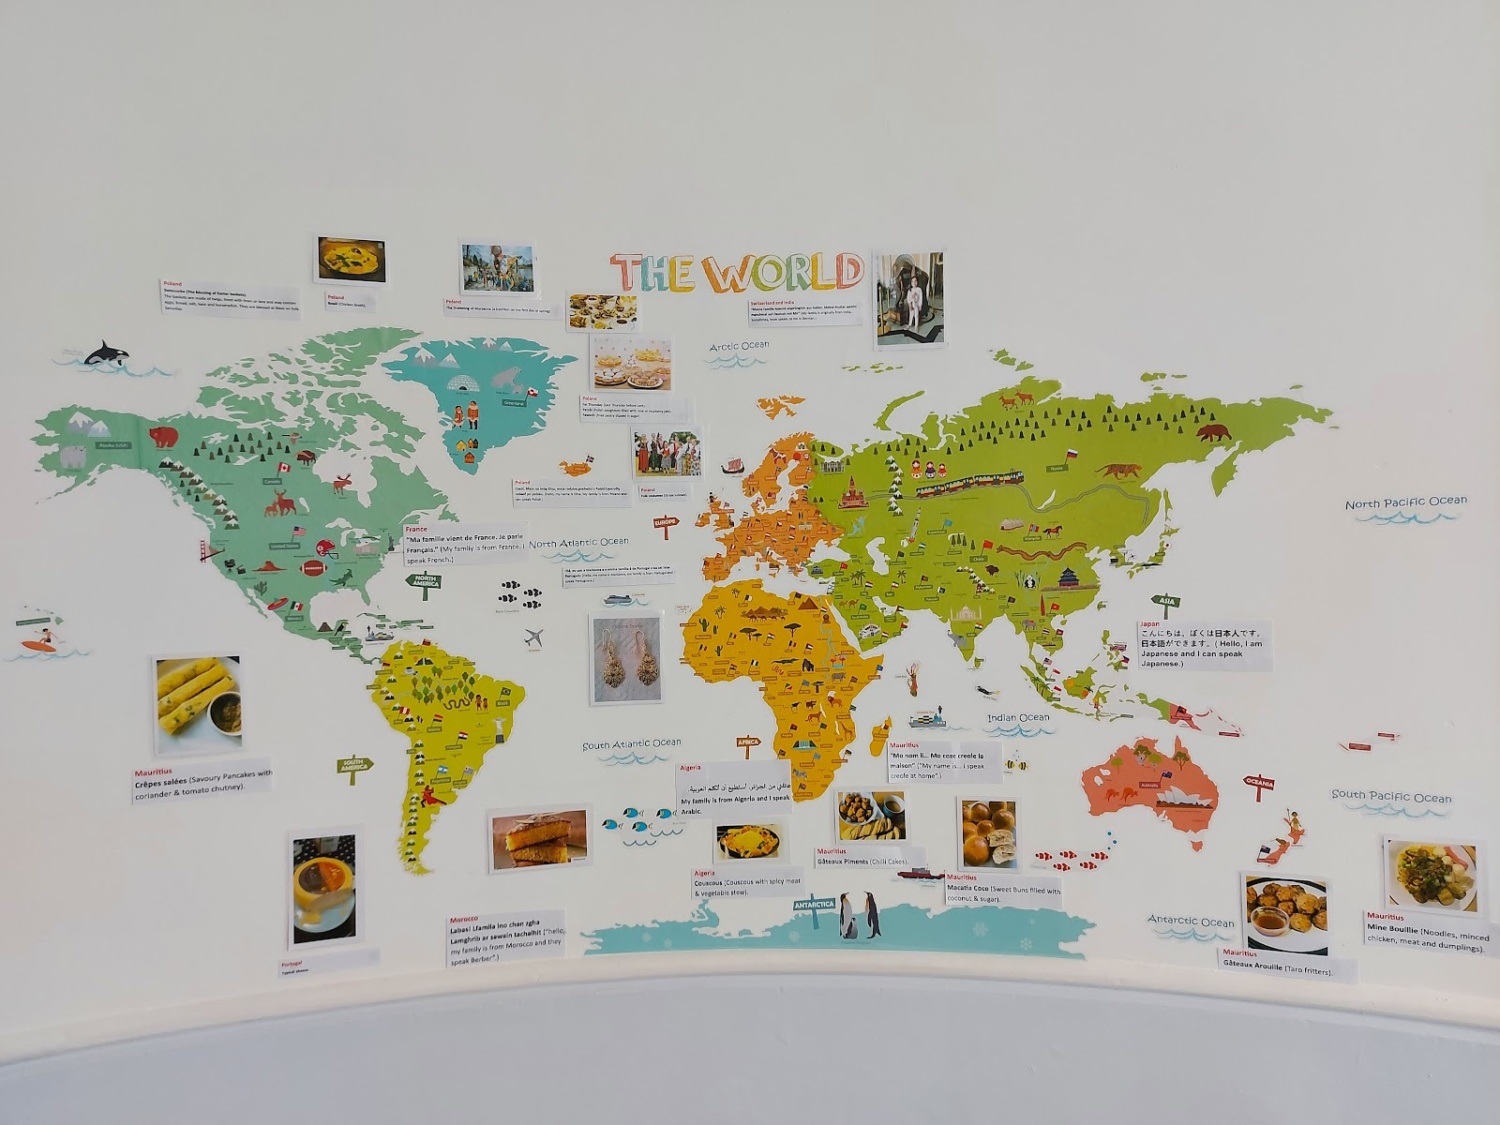 Photo of a map of the world with annotations and images around it to help children learn.